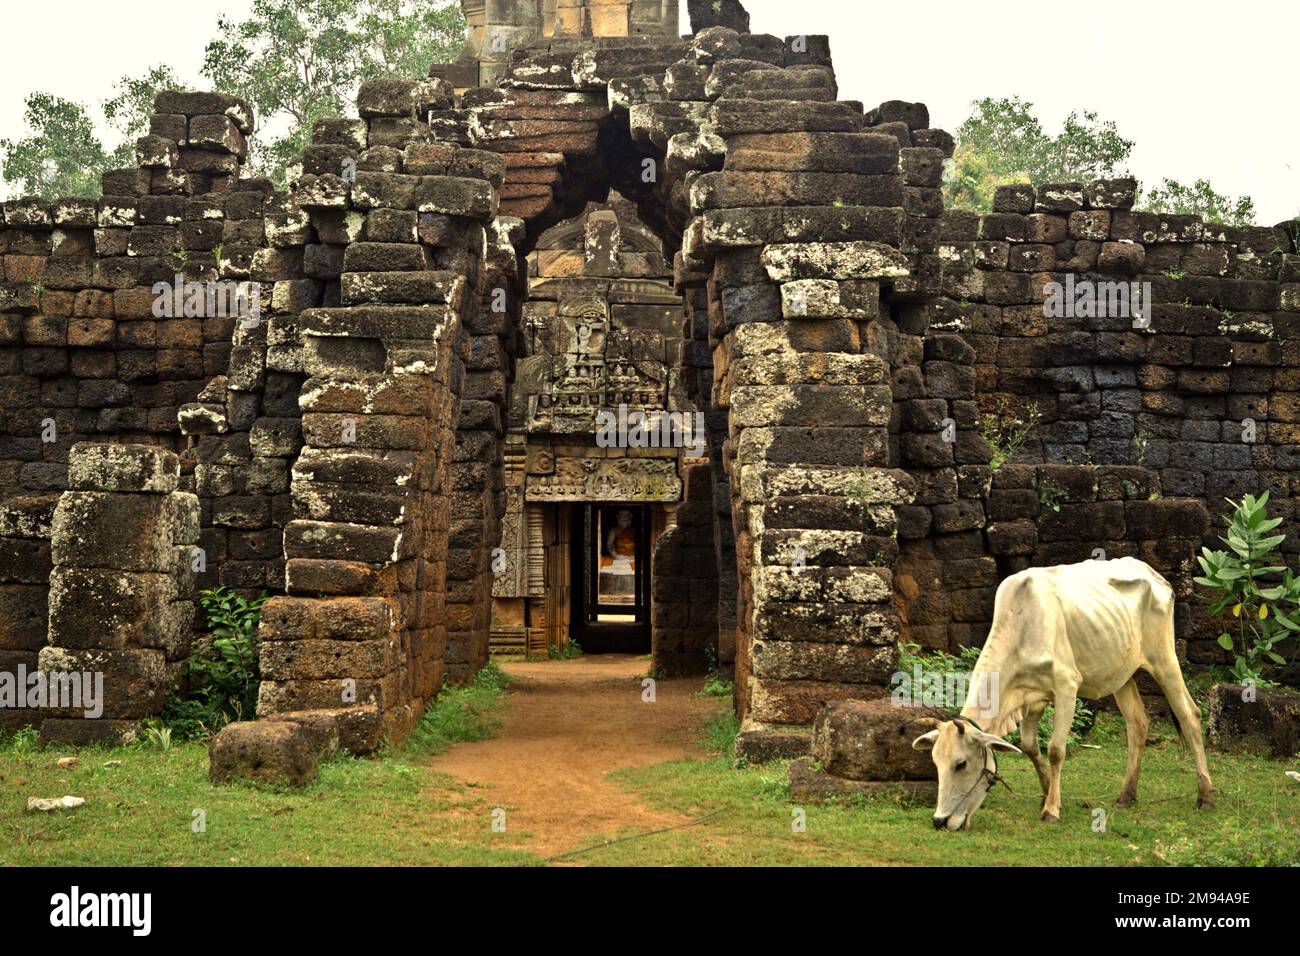 A cow is feeding on grass in front of a gate structure at Banteay Prei Nokor, a rarely touristed 11th century temple affiliated with Buddhism located in Kampong Cham (Kompong Cham), Cambodia. 'The sustainability of cultural heritage resources is strongly linked to the effective participation of local communities in the conservation and management of these resources,' wrote a team of scientists led by Sunday Oladipo Oladeji in the abstract of their paper published on Sage Journals on Oct 28, 2022. Stock Photo